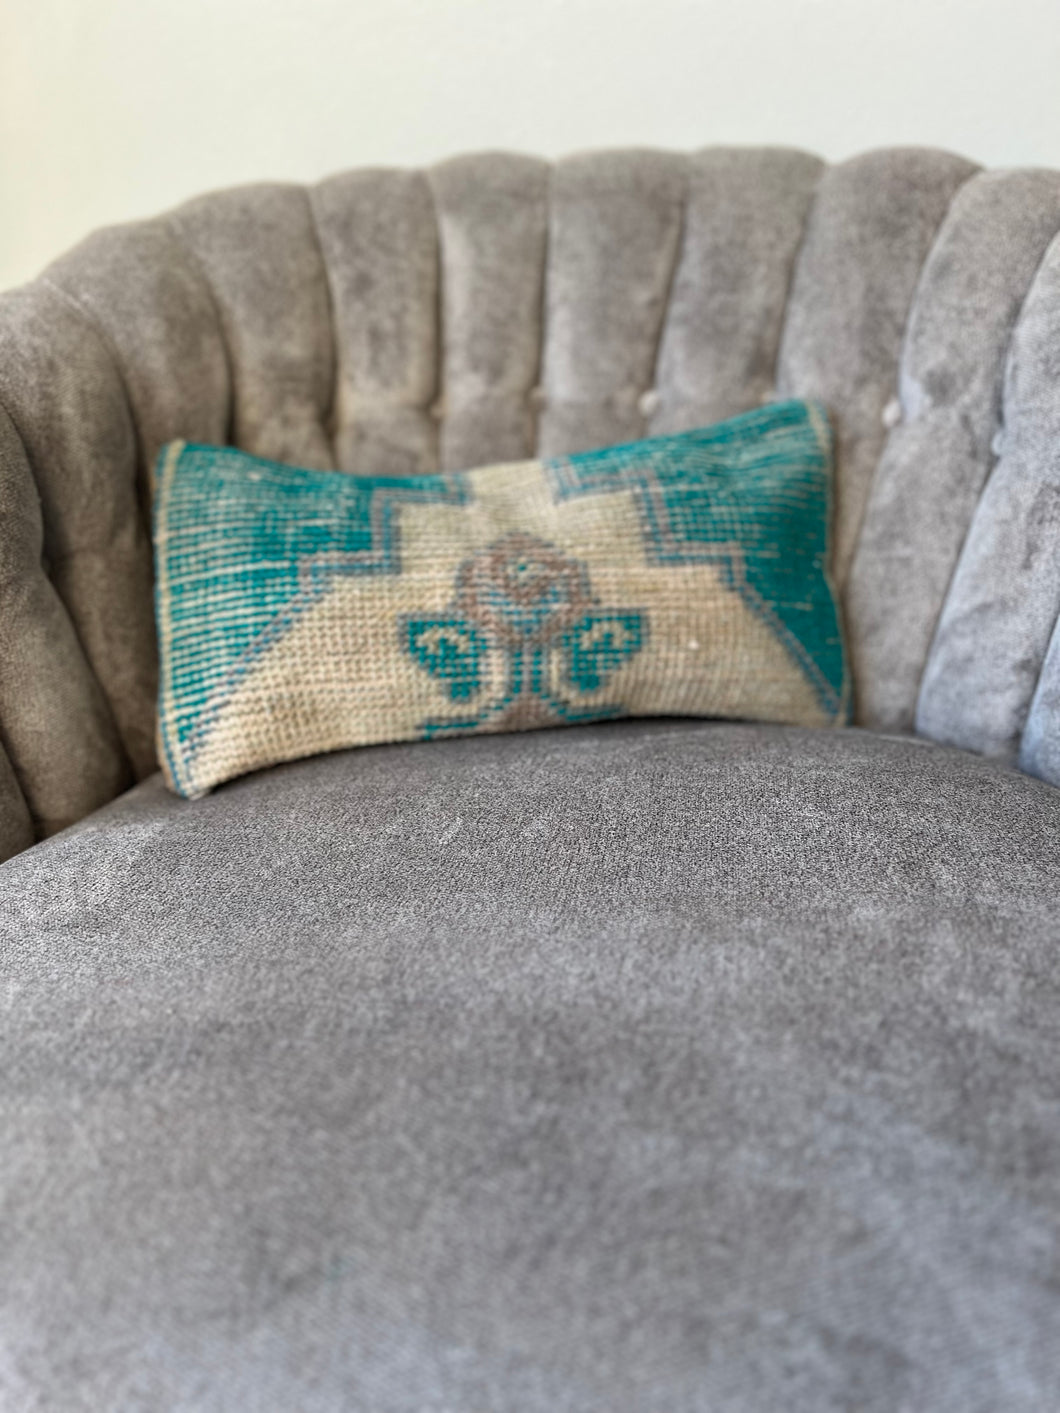 Vintage Turquoise and Tan Rug Pillow